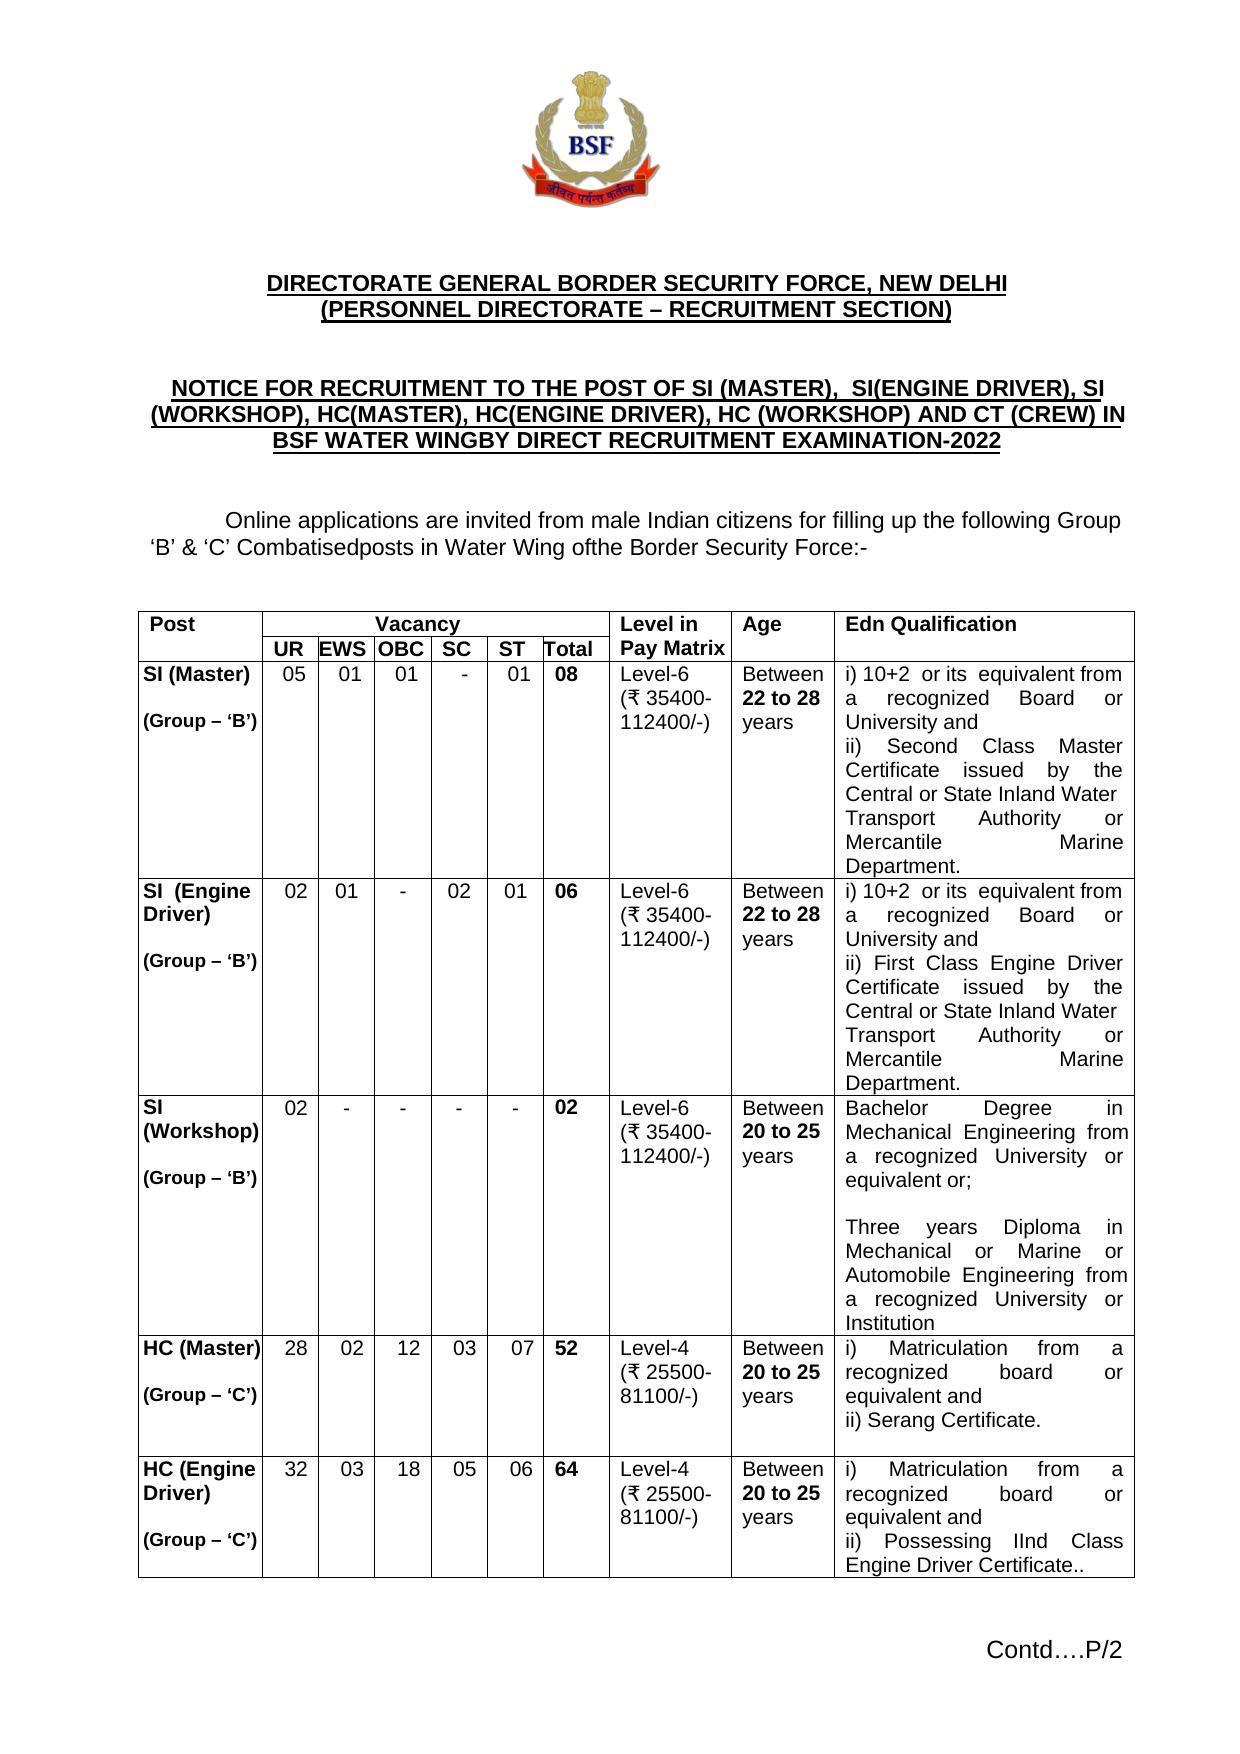 BSF Water Wing Recruitment 2022 Short Notice - Page 2